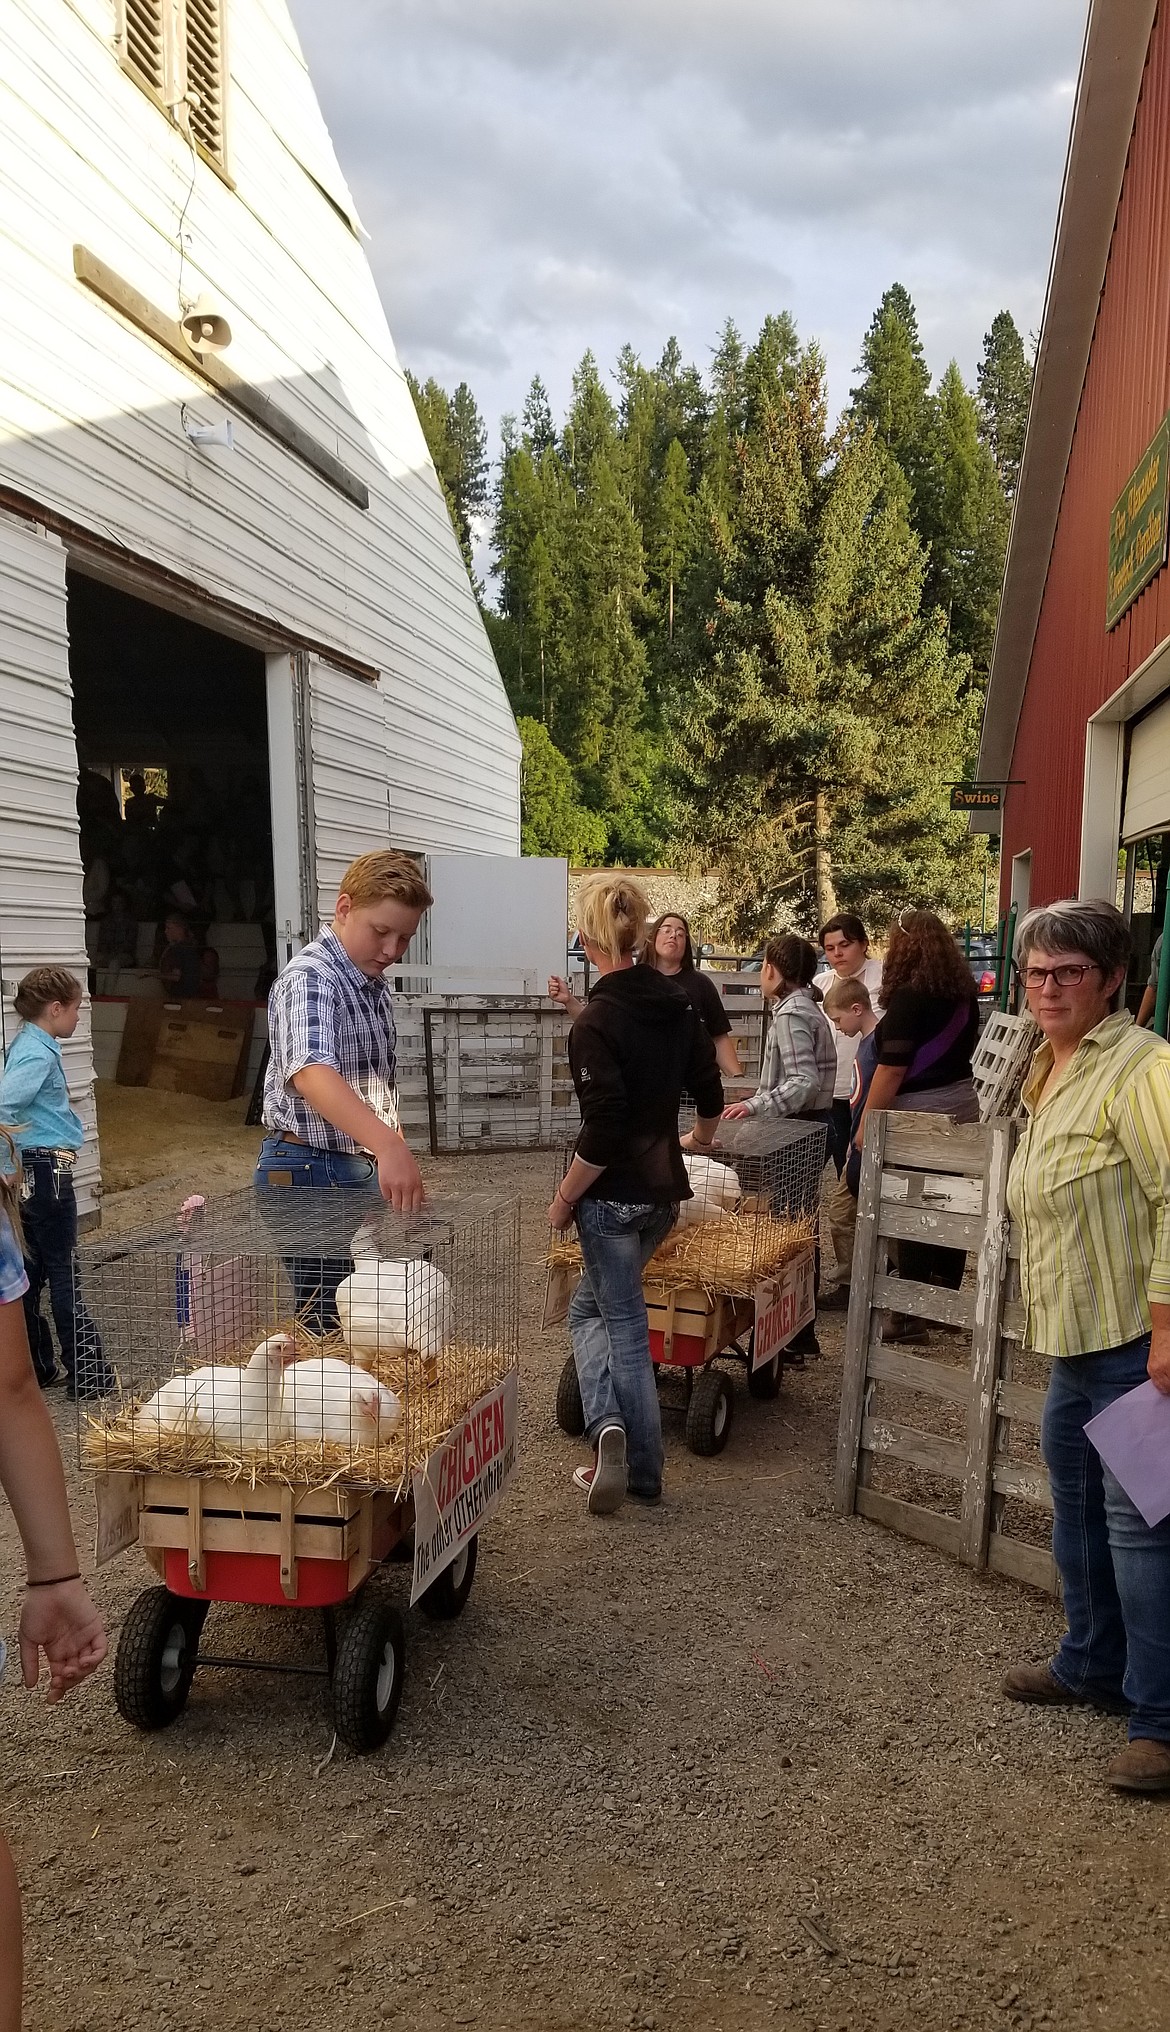 Photo by MANDI BATEMANWagons carrying chickens to show off.